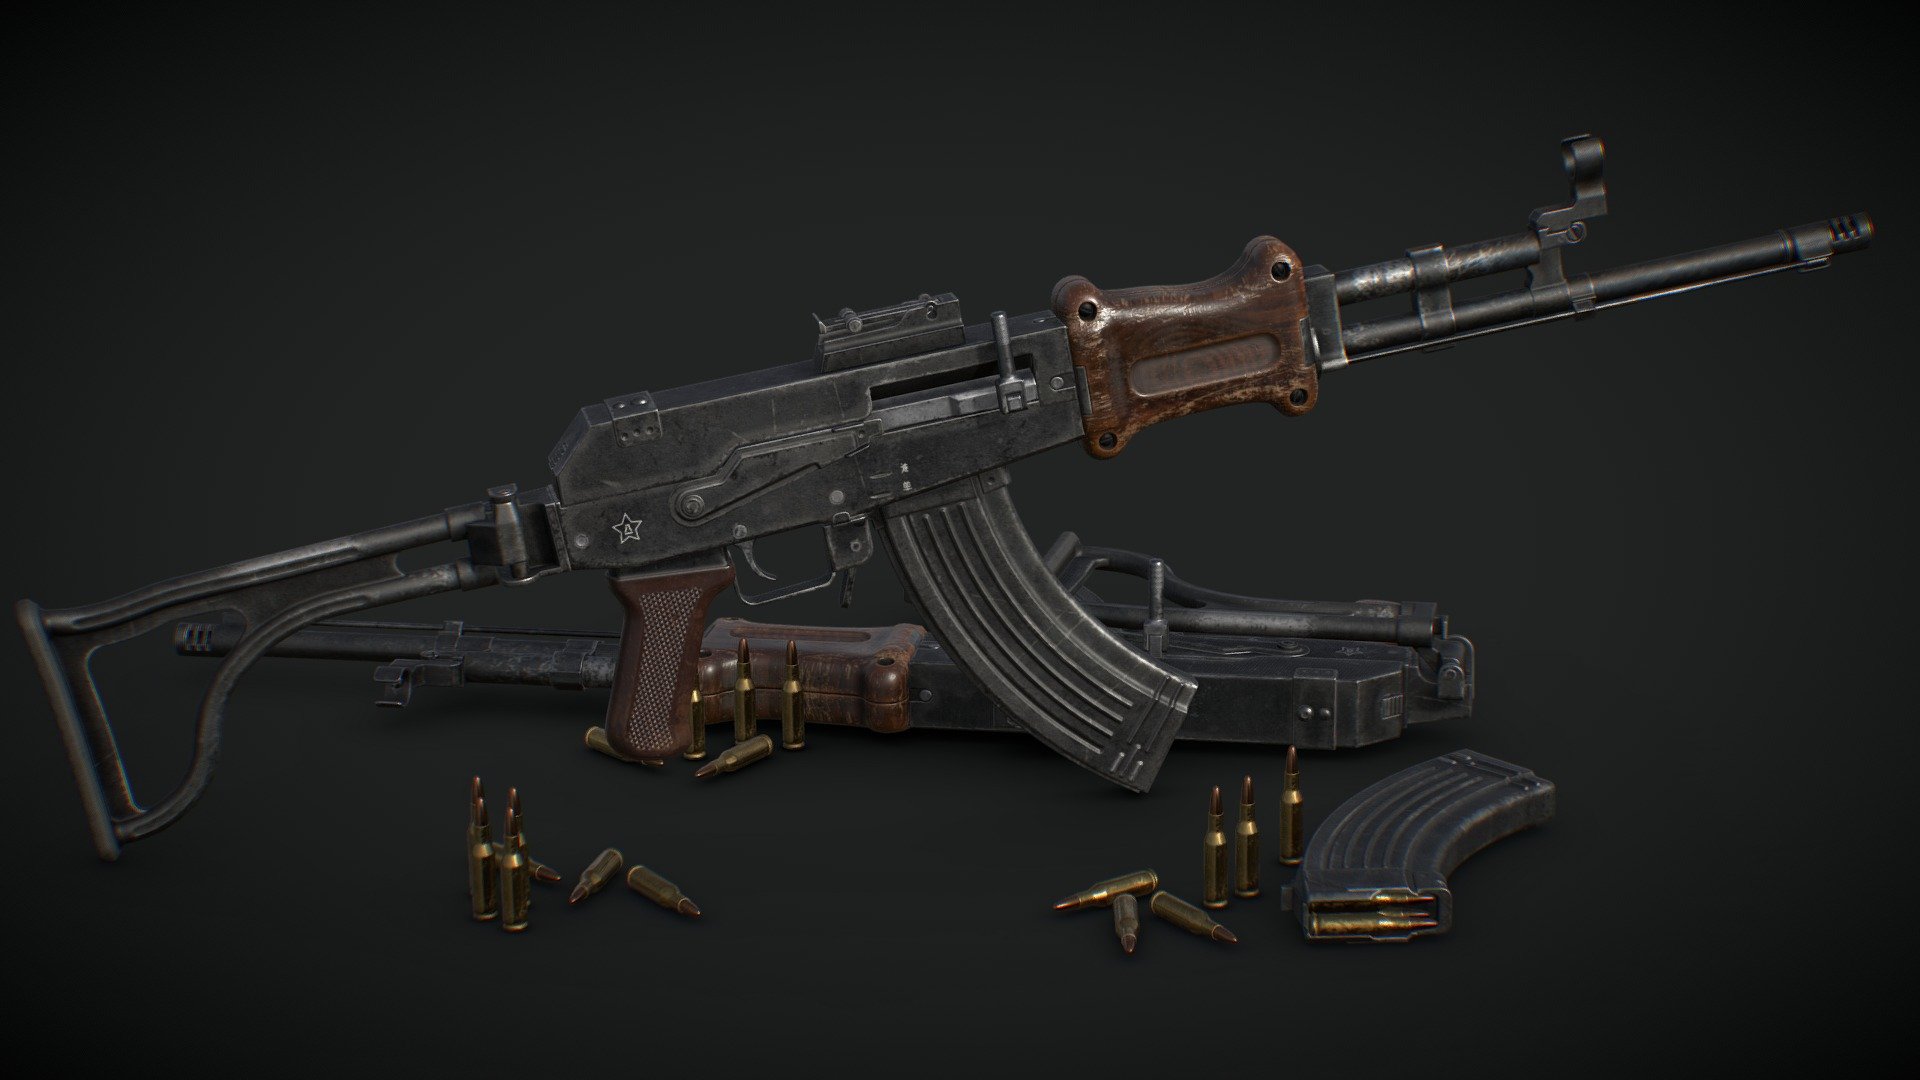 The chinese assault rifle from Fallout 3. Based on the recent Forgotten Weapons video build. Made it 7.62x39 despite the game version being 5.56 3d model